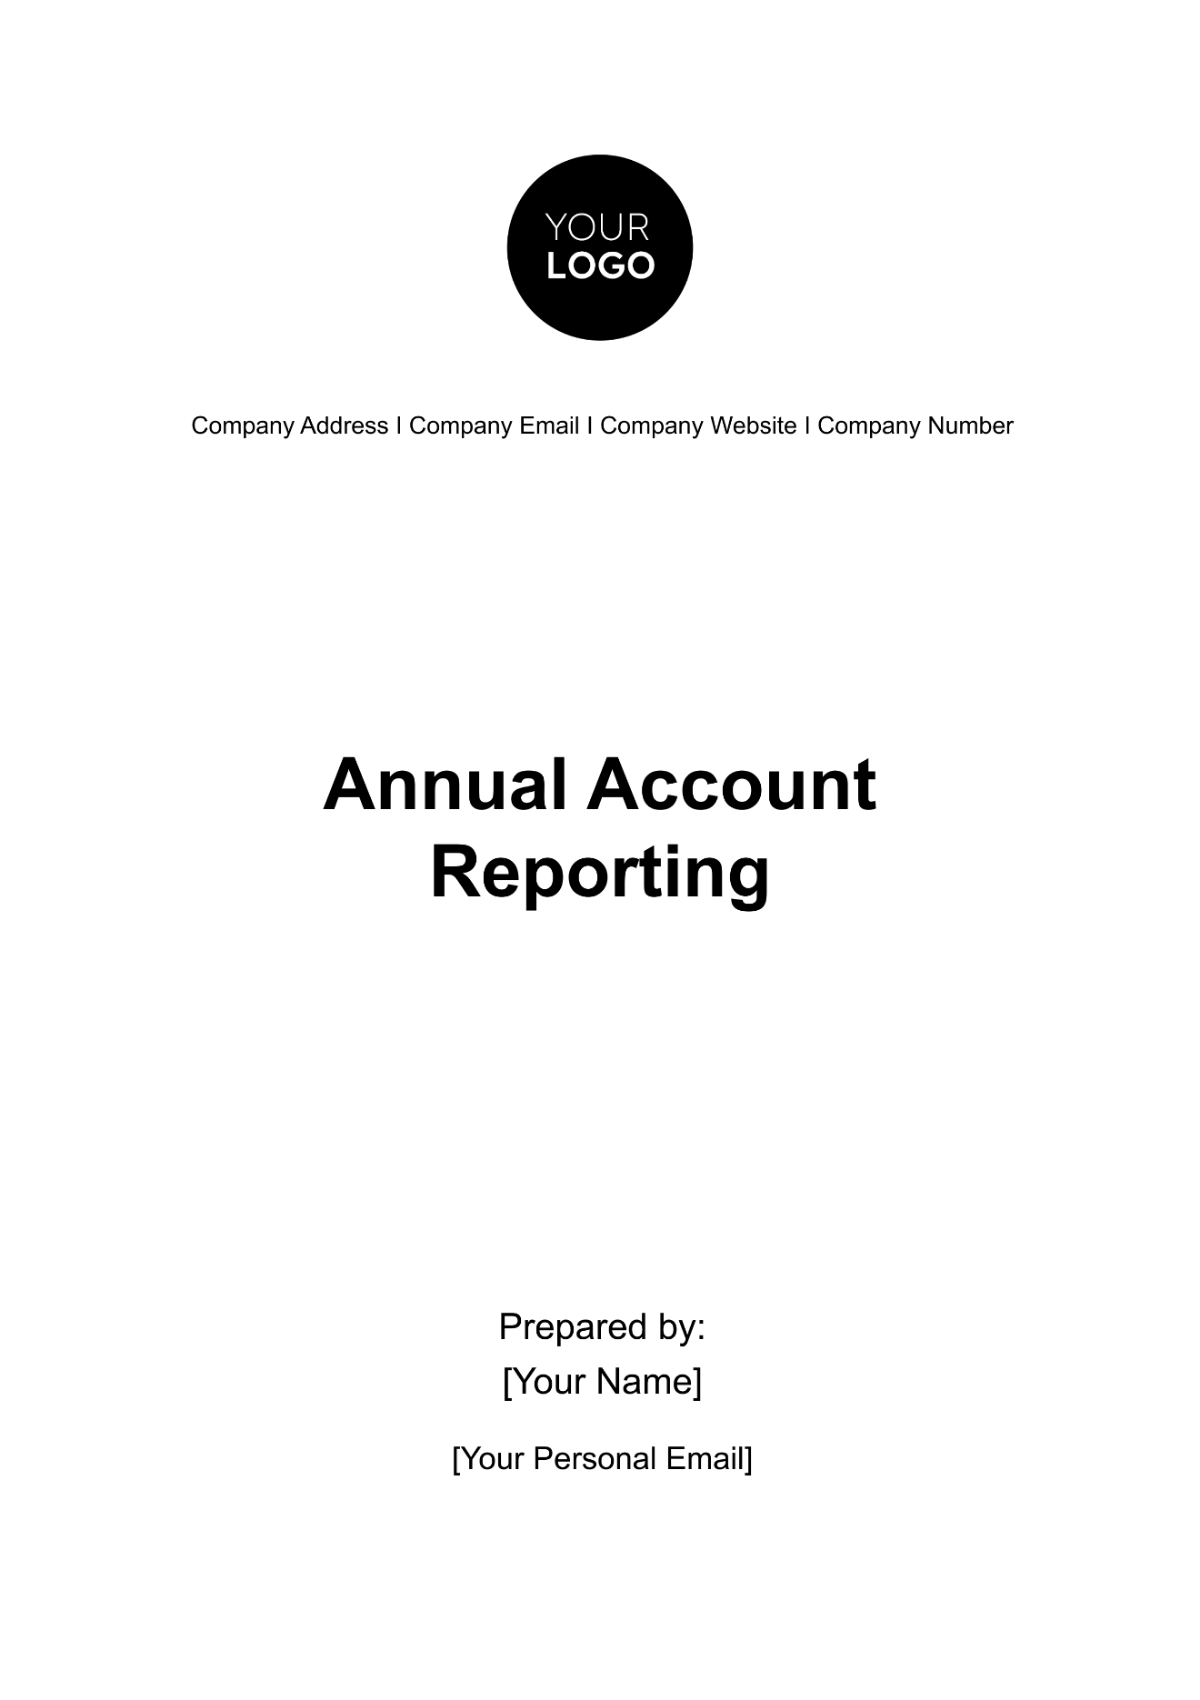 Annual Account Reporting Template